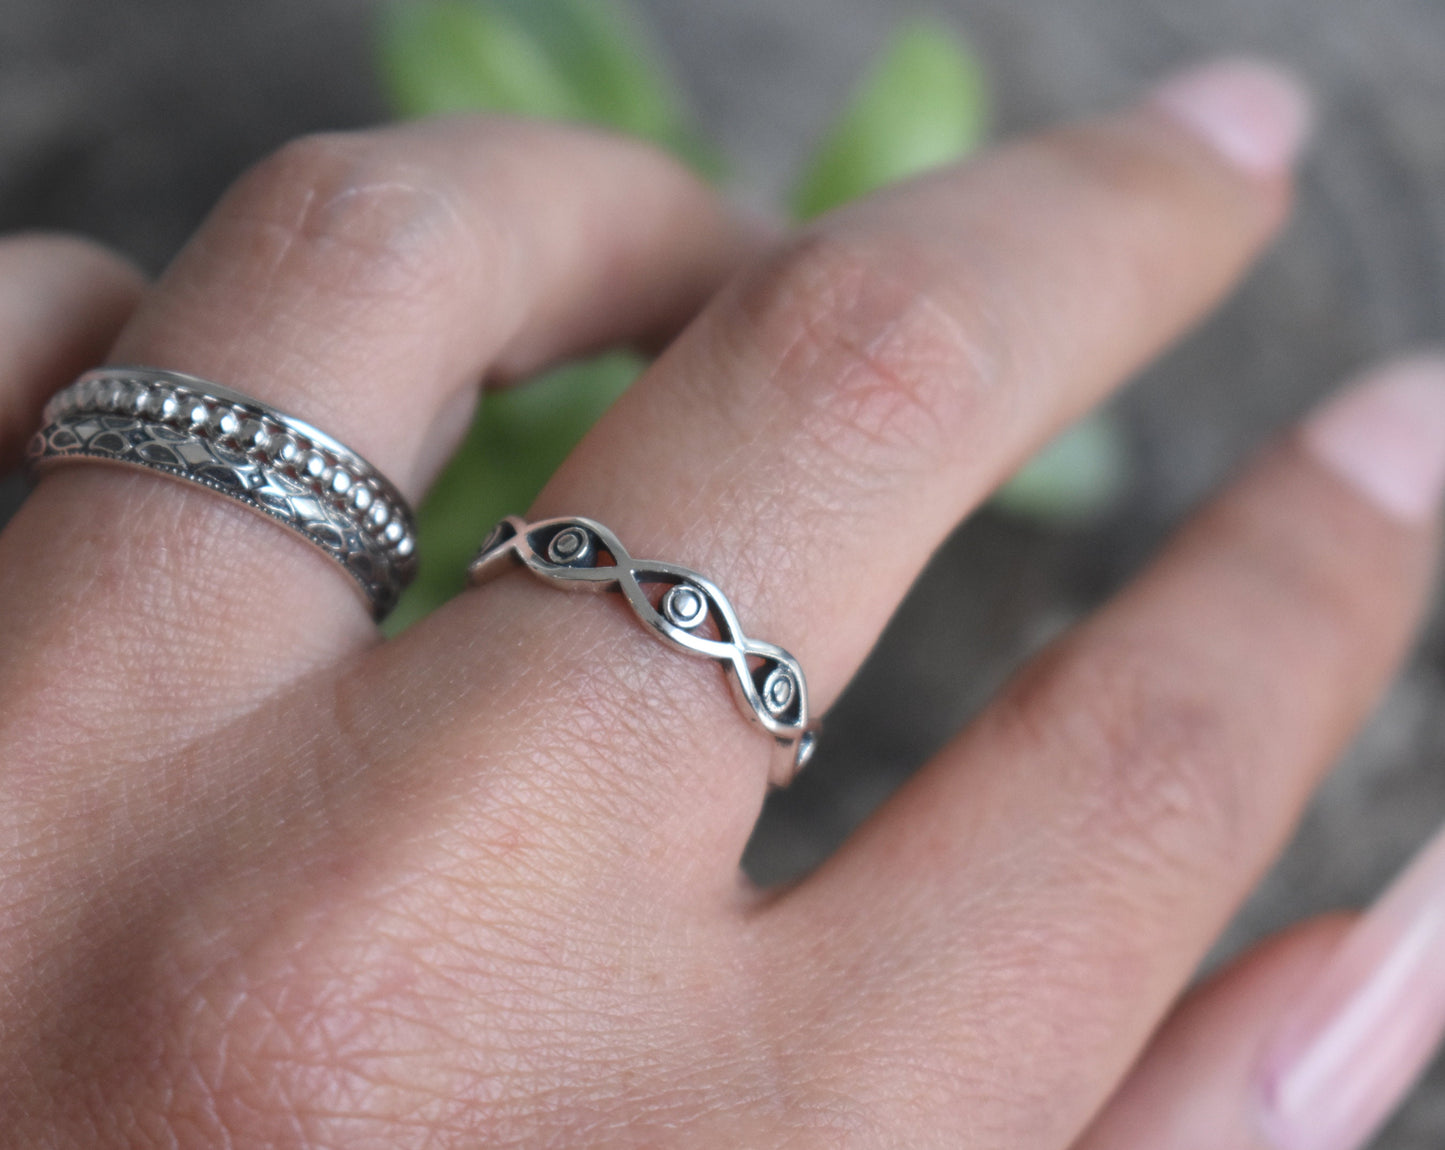 Evil Eye Ring- Silver Eye Ring, Witchy Jewelry, All Seeing Eye -Eternity Band